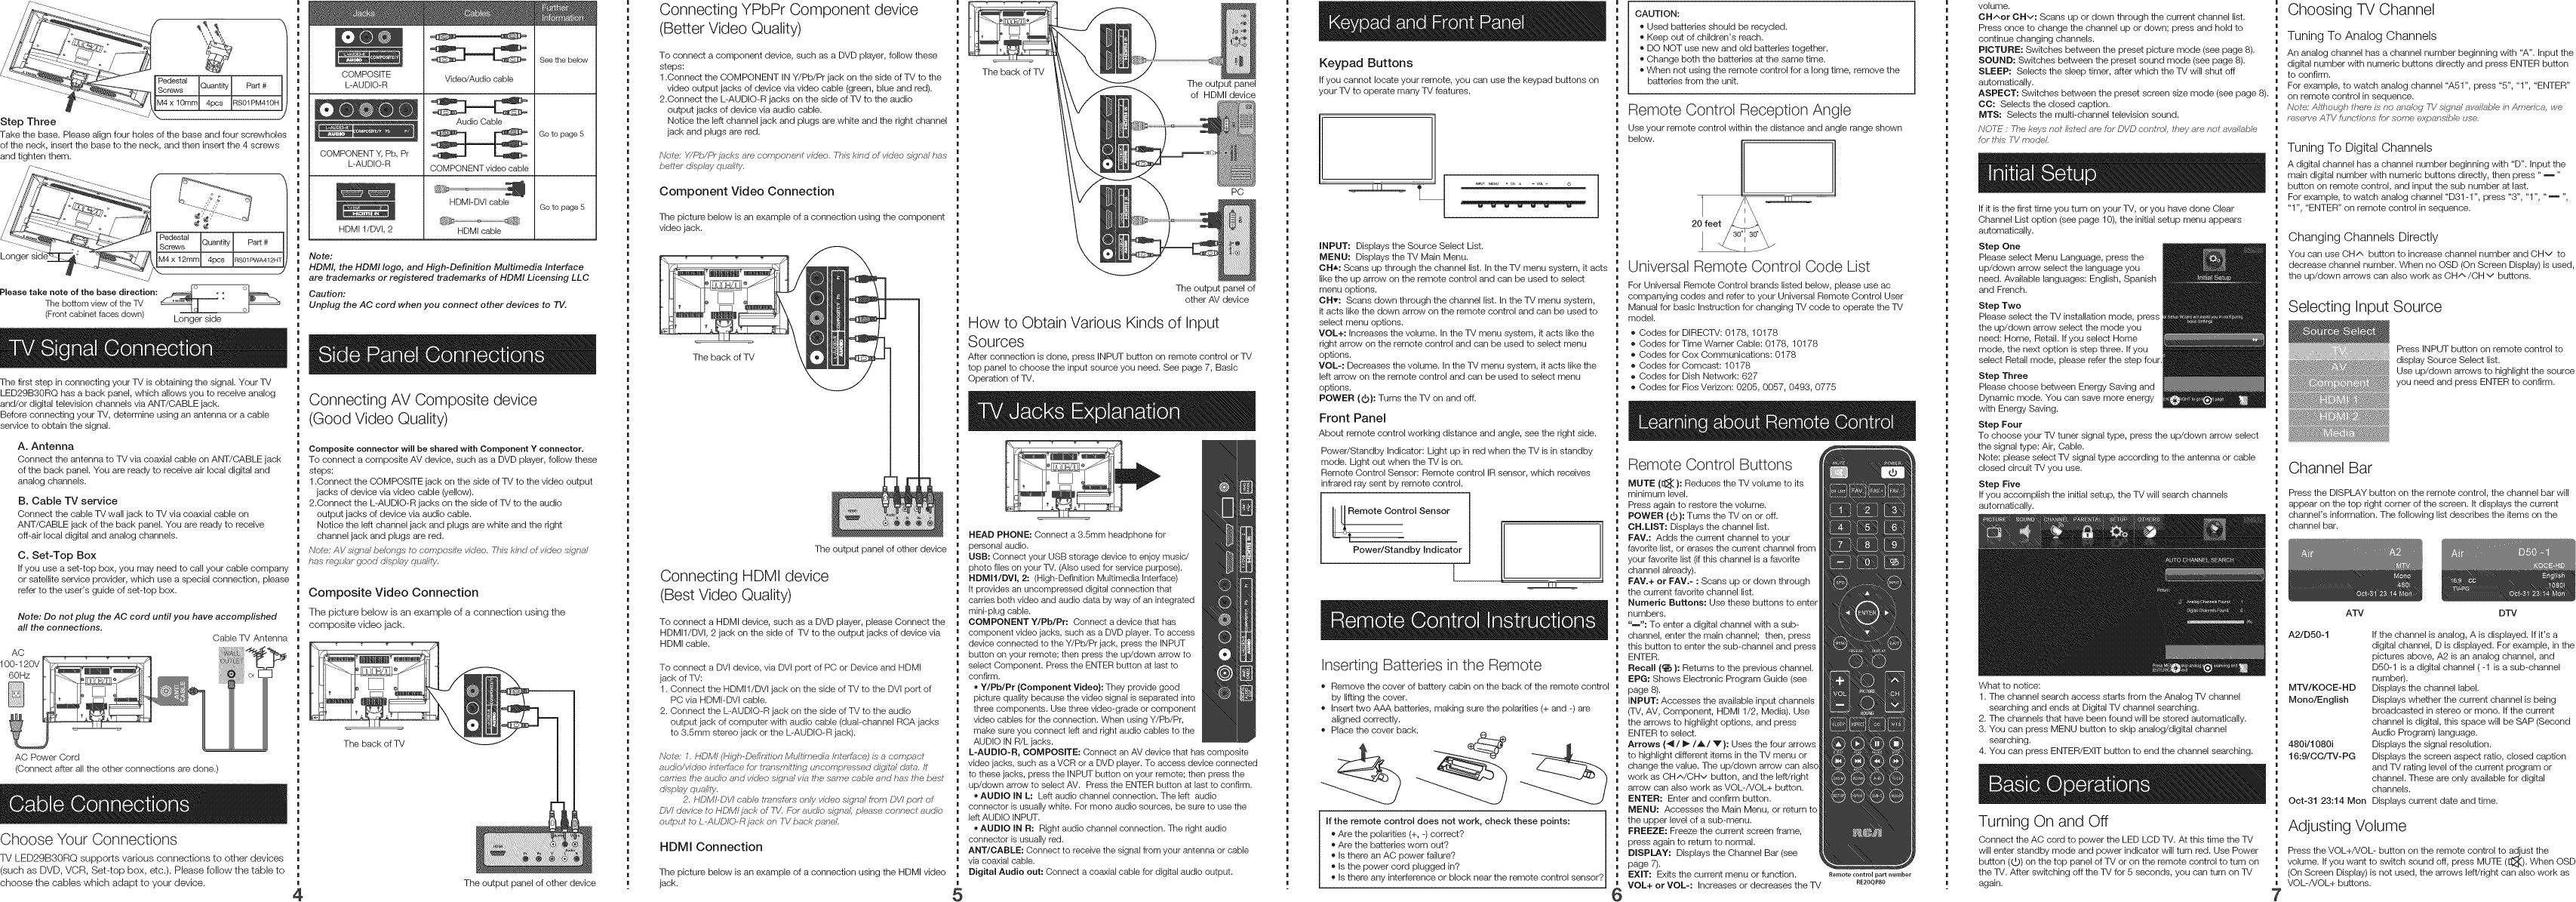 Page 2 of 4 - RCA LED29B30RQ User Manual  LCD TV - Manuals And Guides 1405300L